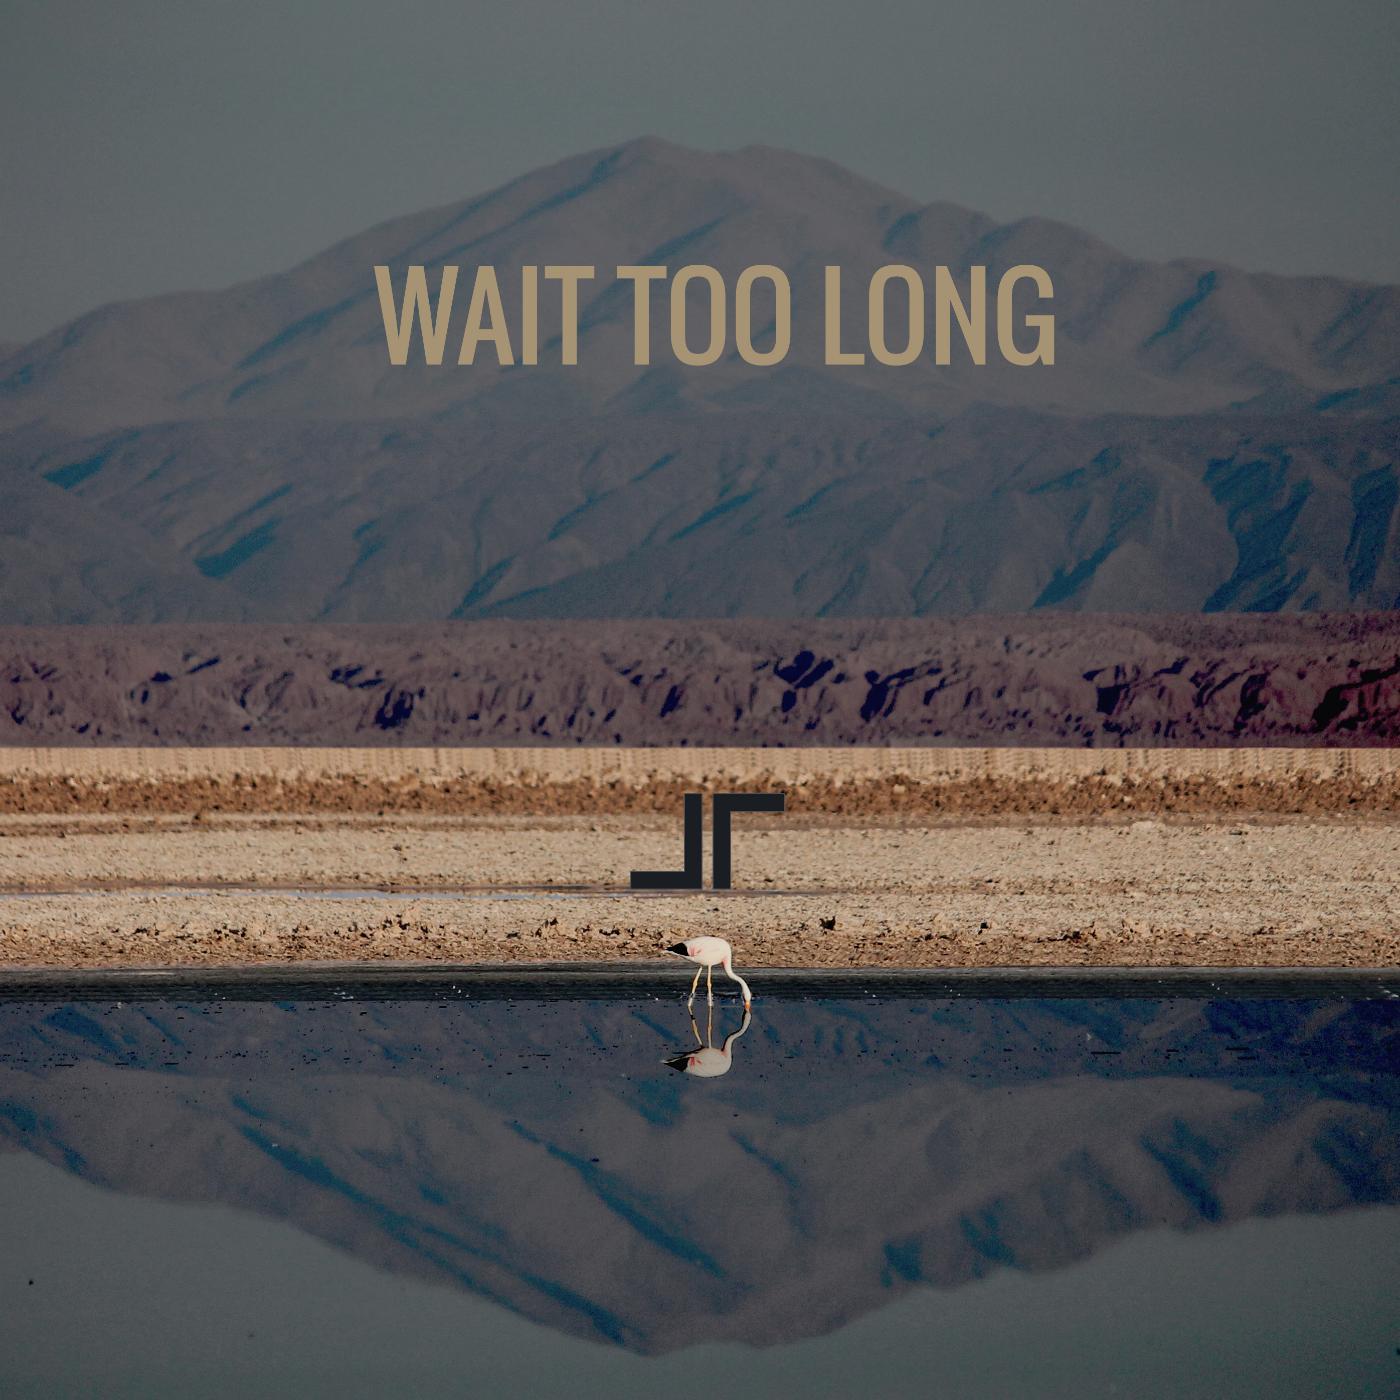 Wait too long. Waiting for too long. Waited too long